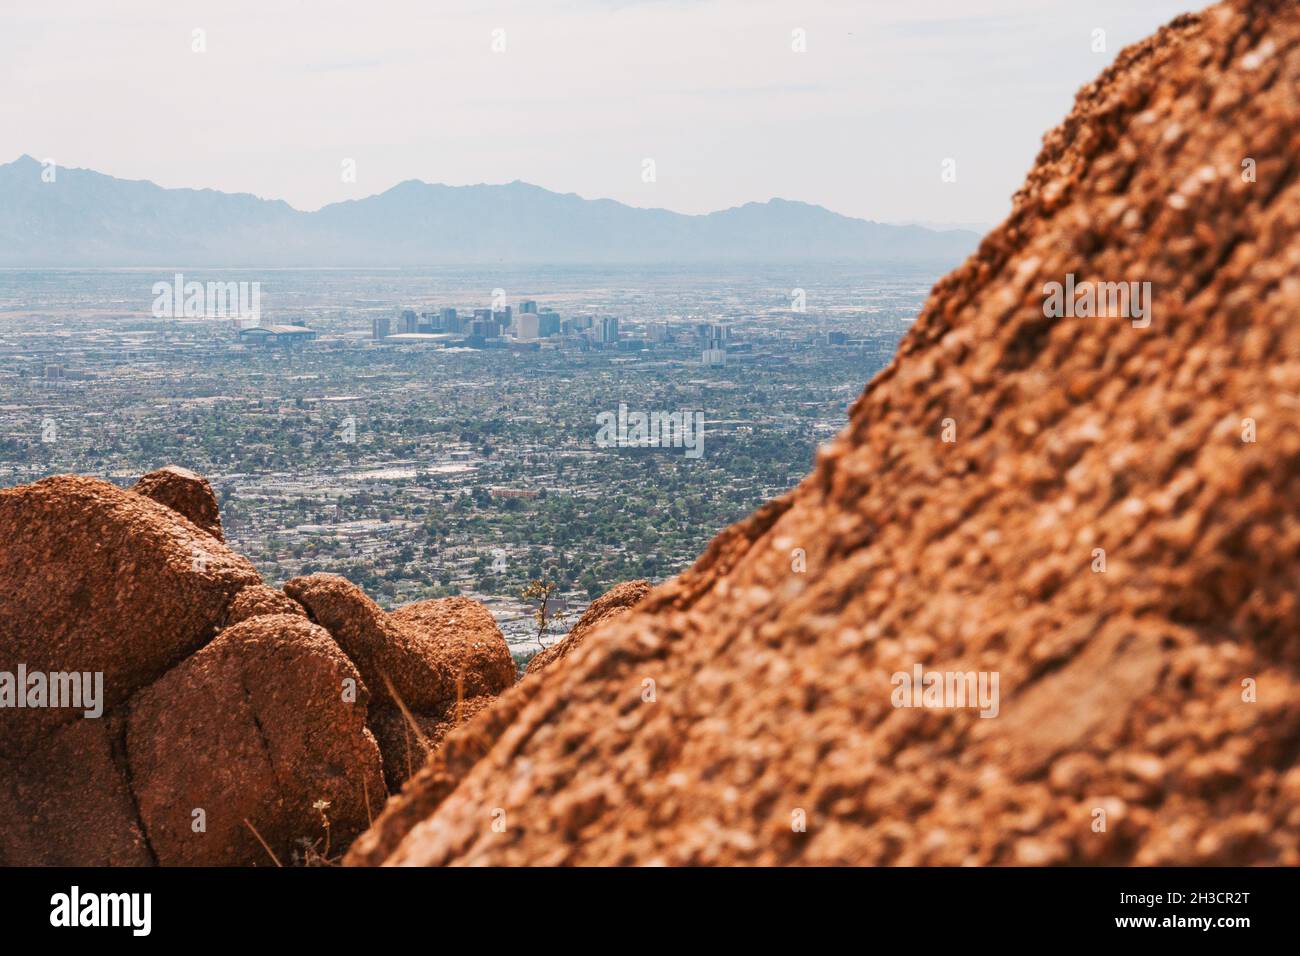 Phoenix city skyline as seen from the big red rock that is Camelback Mountain, Arizona, United States Stock Photo